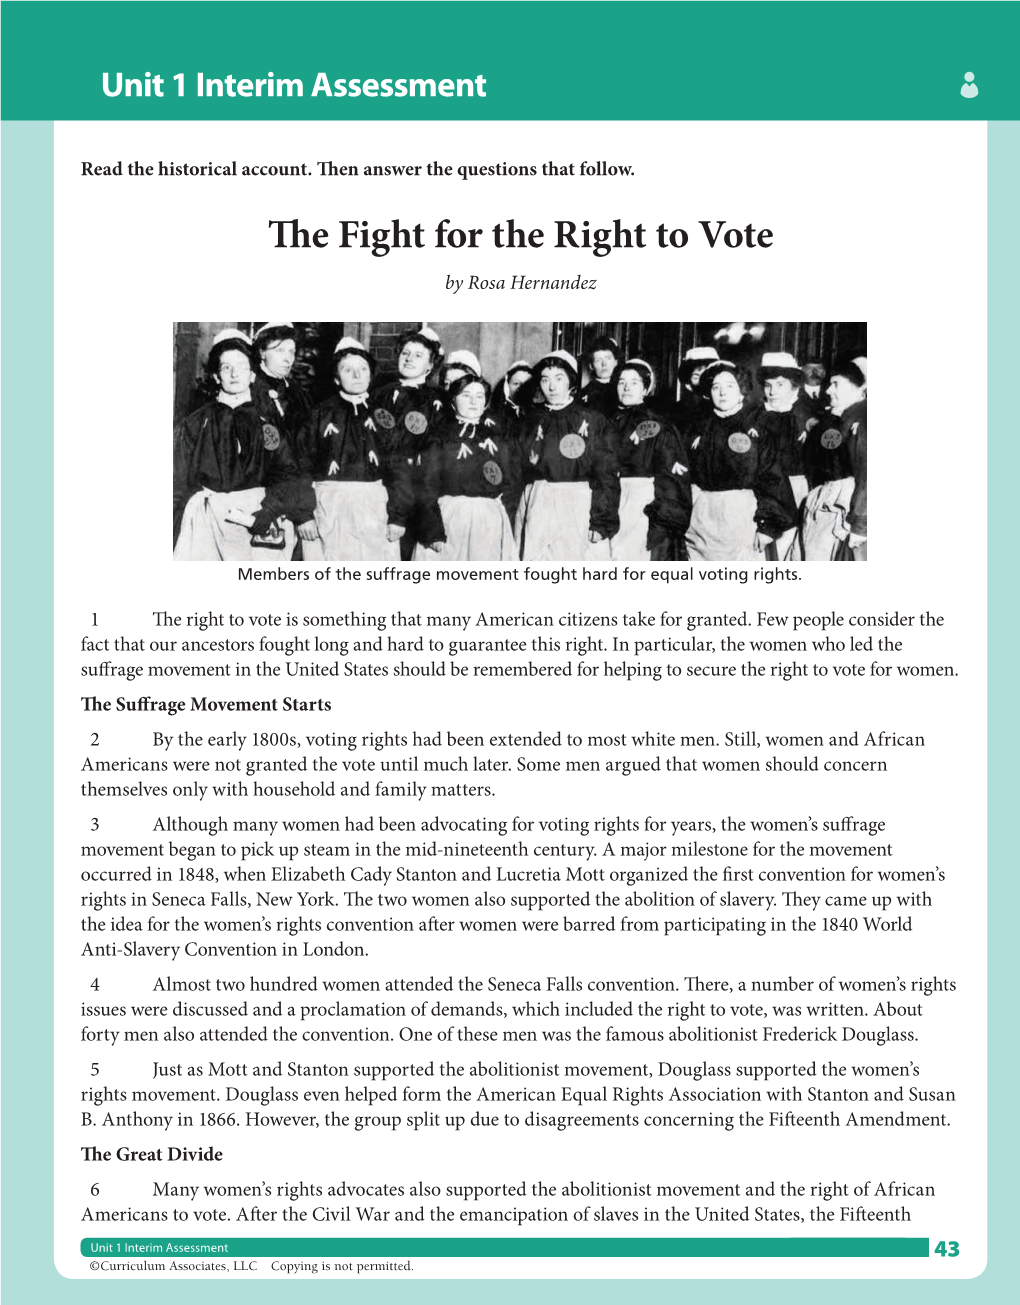 The Fight for the Right to Vote by Rosa Hernandez